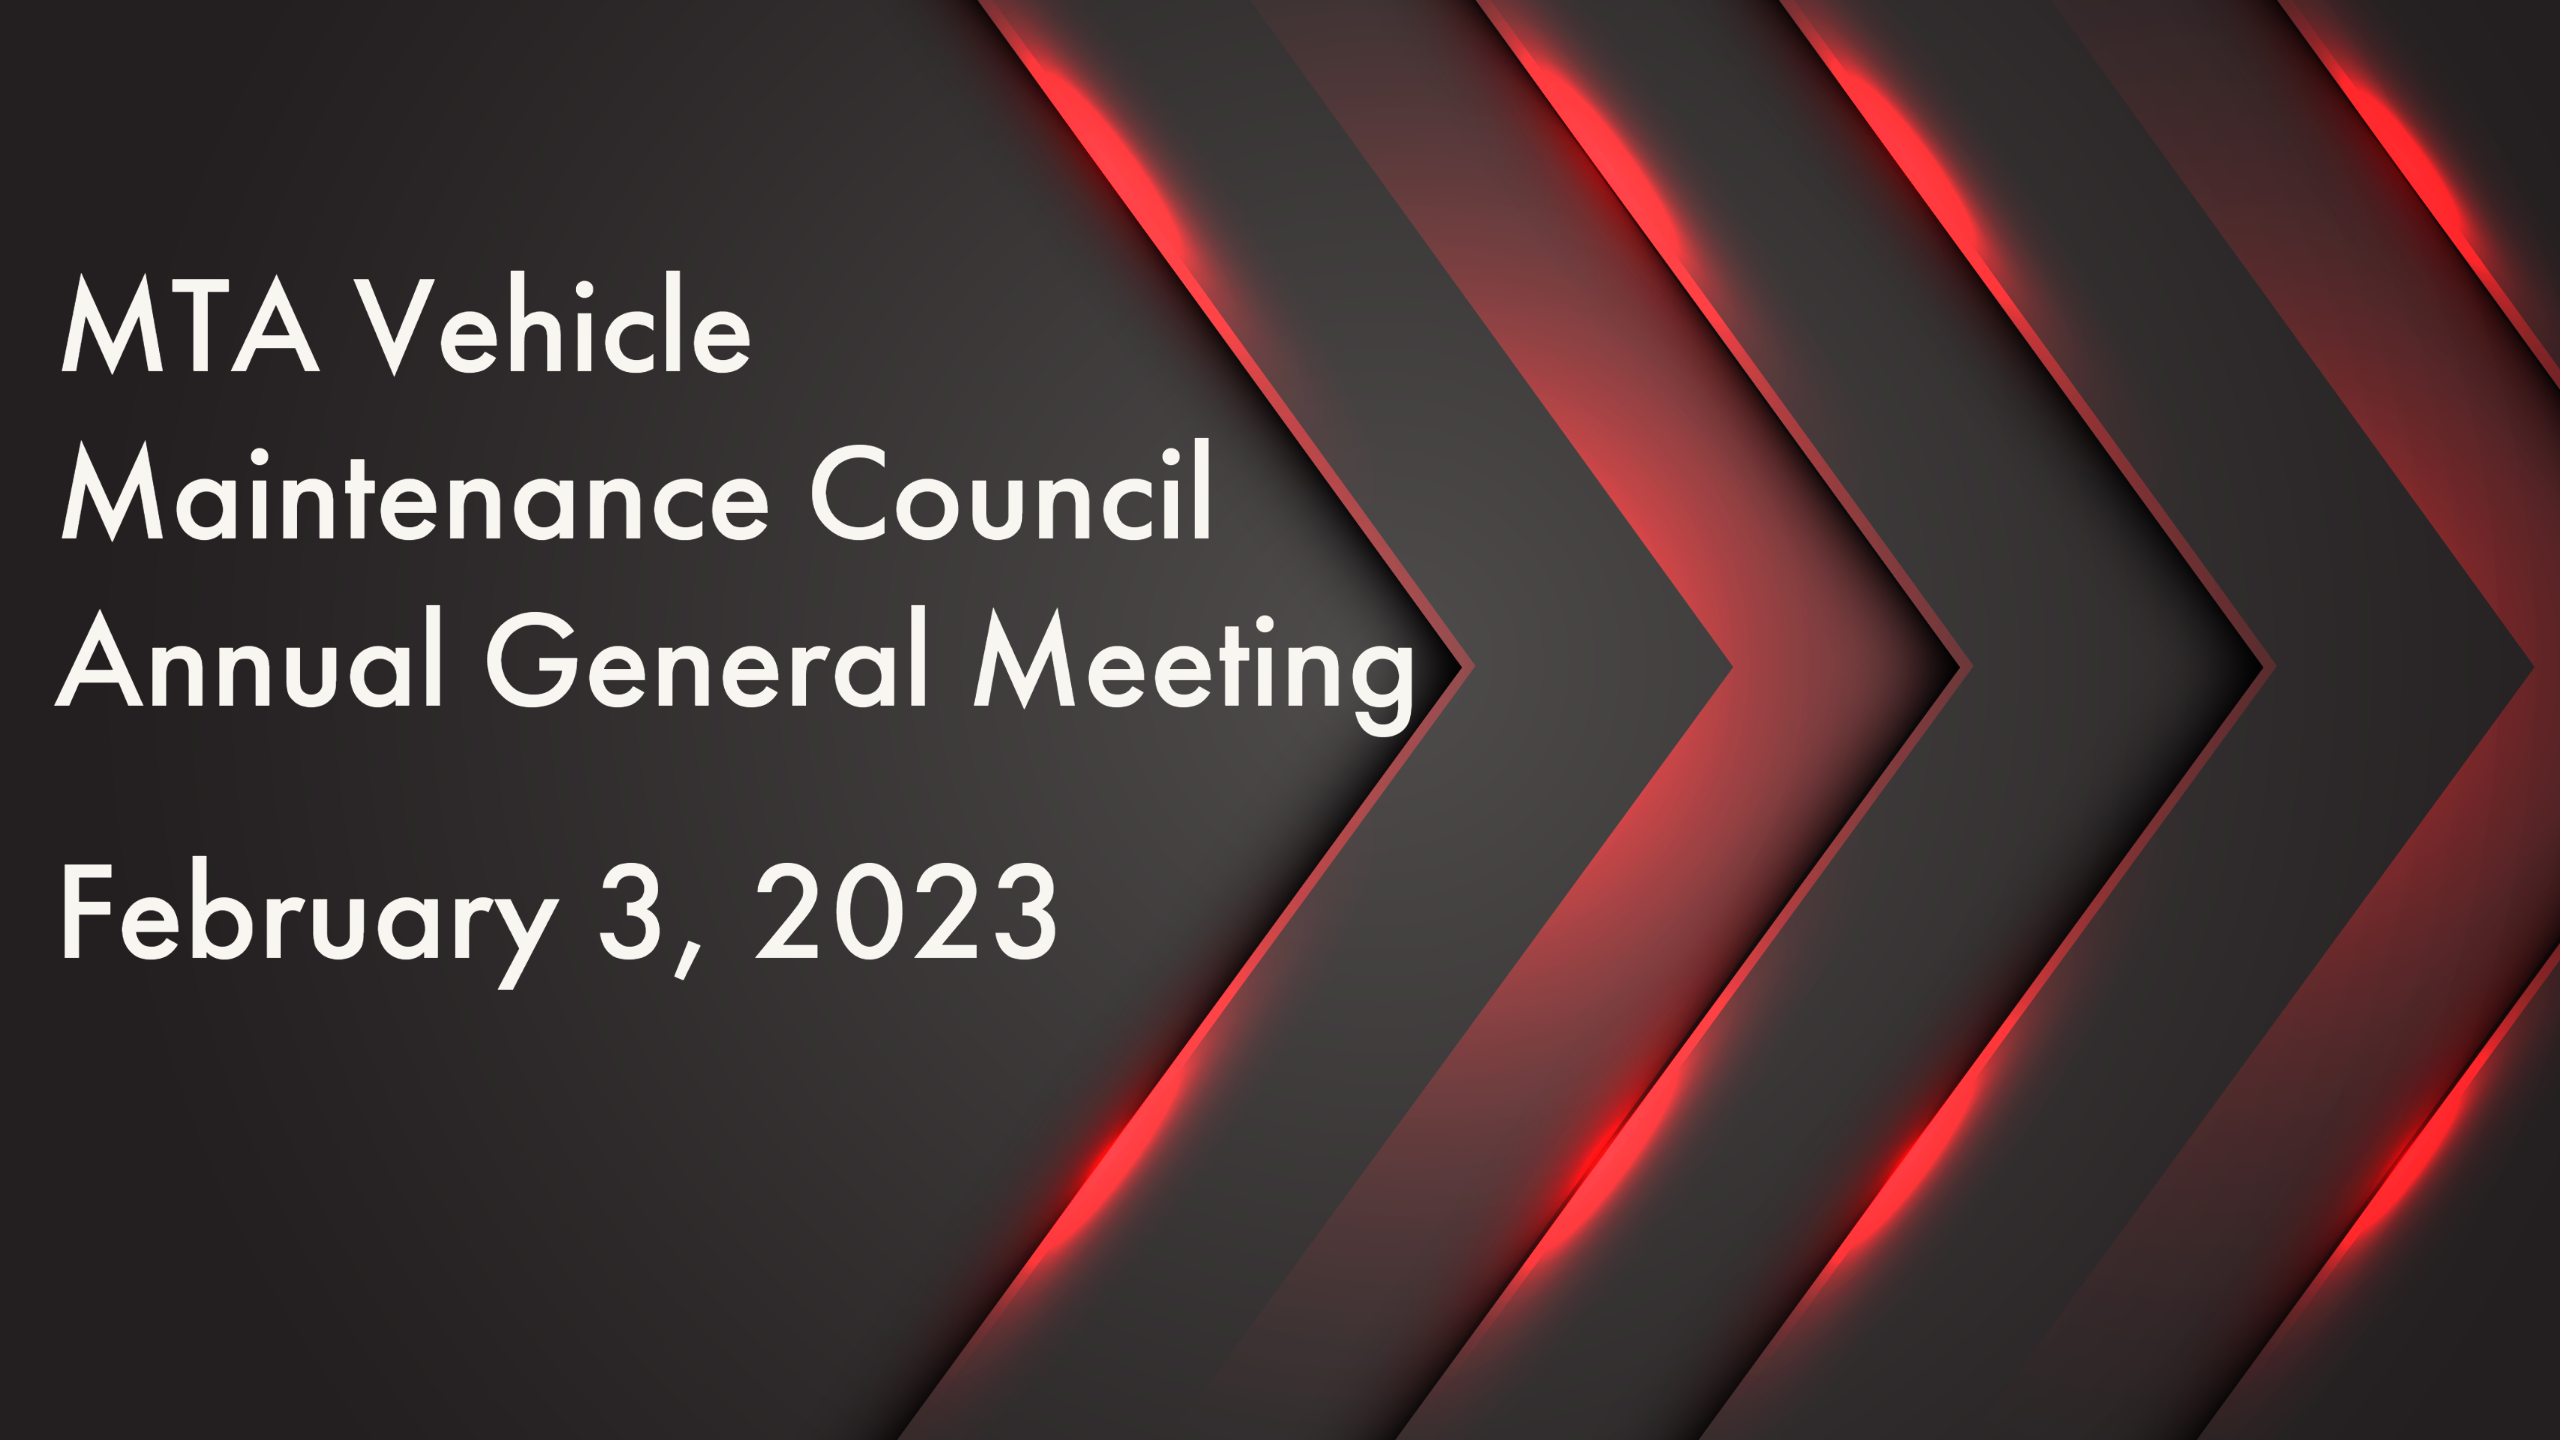 MTA Vehicle Maintenance Council Annual General Meeting February 3, 2023